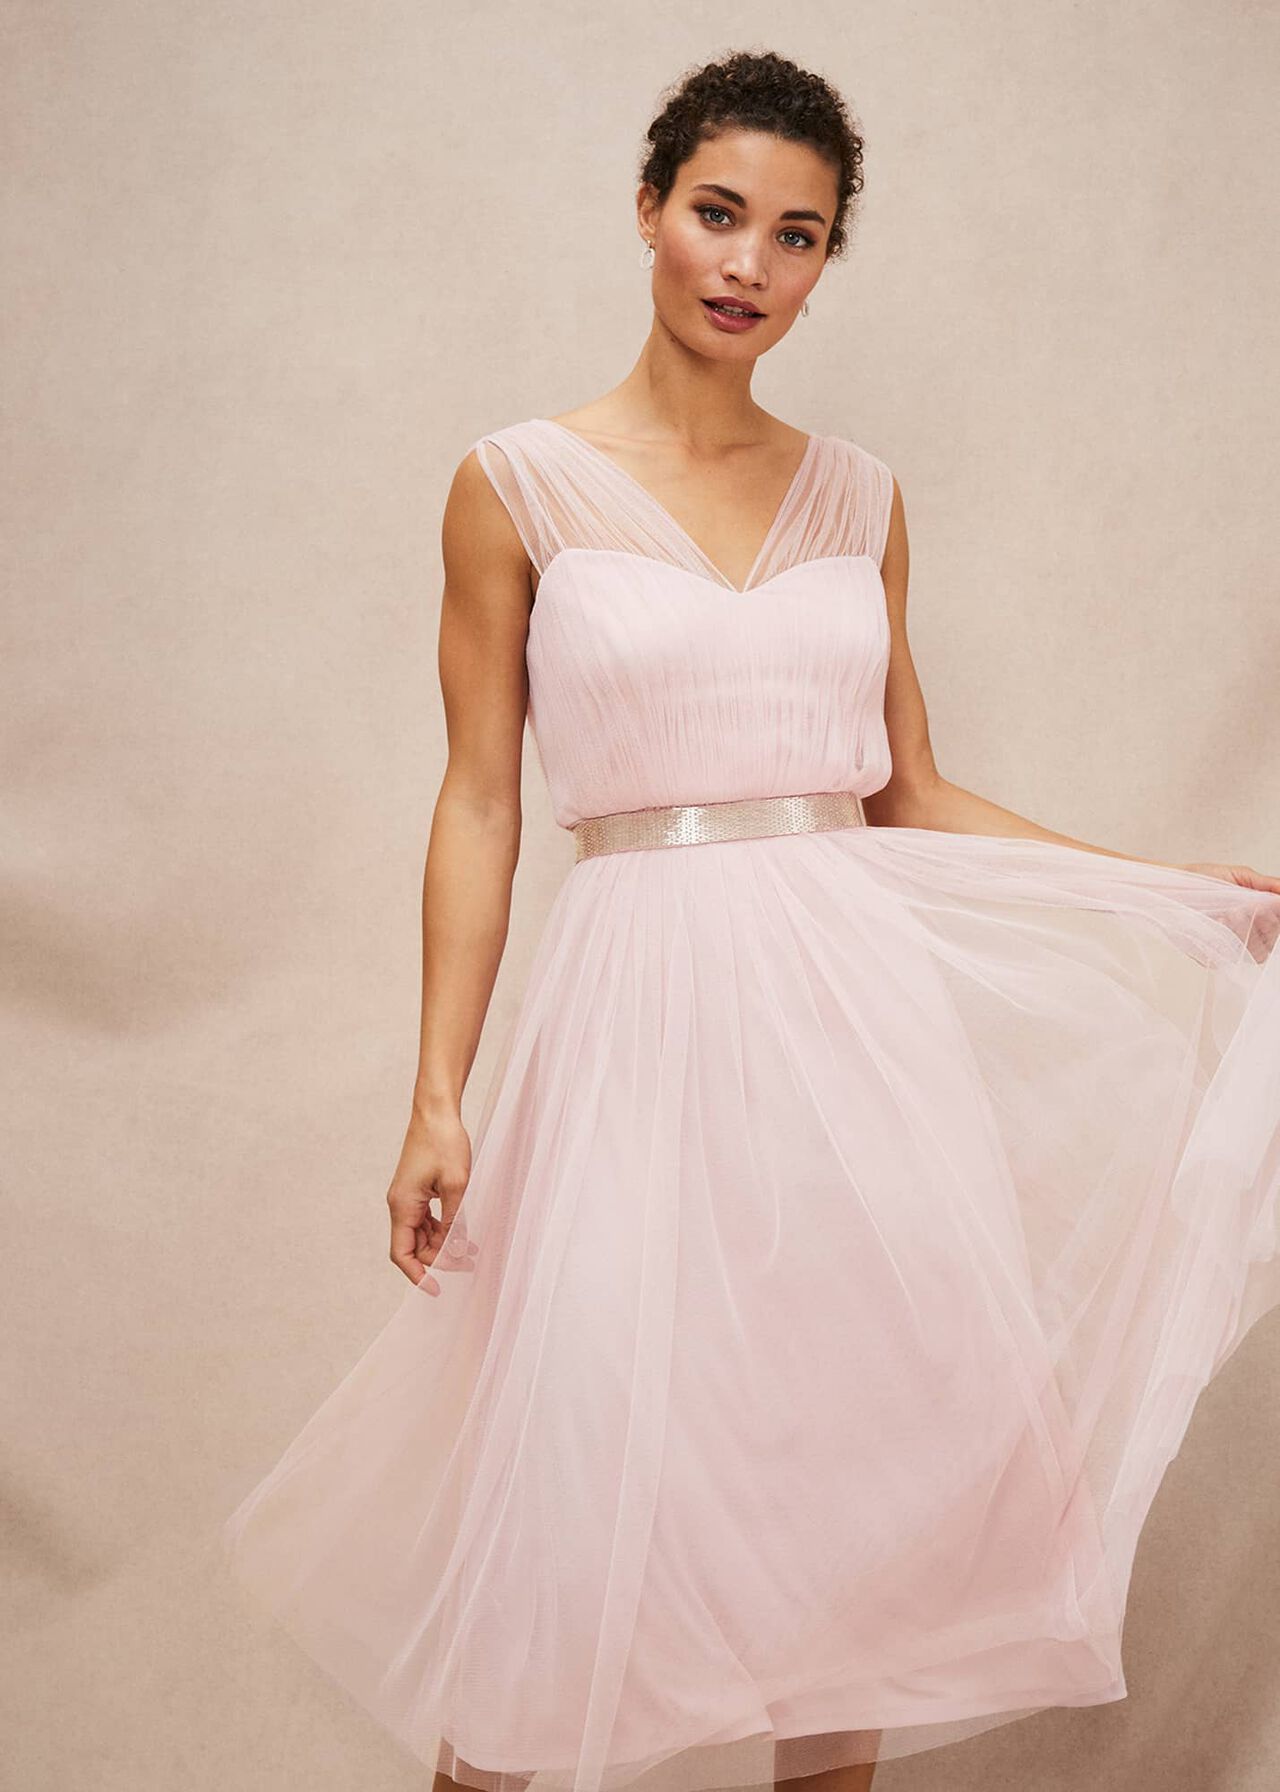 Pink tulle dress